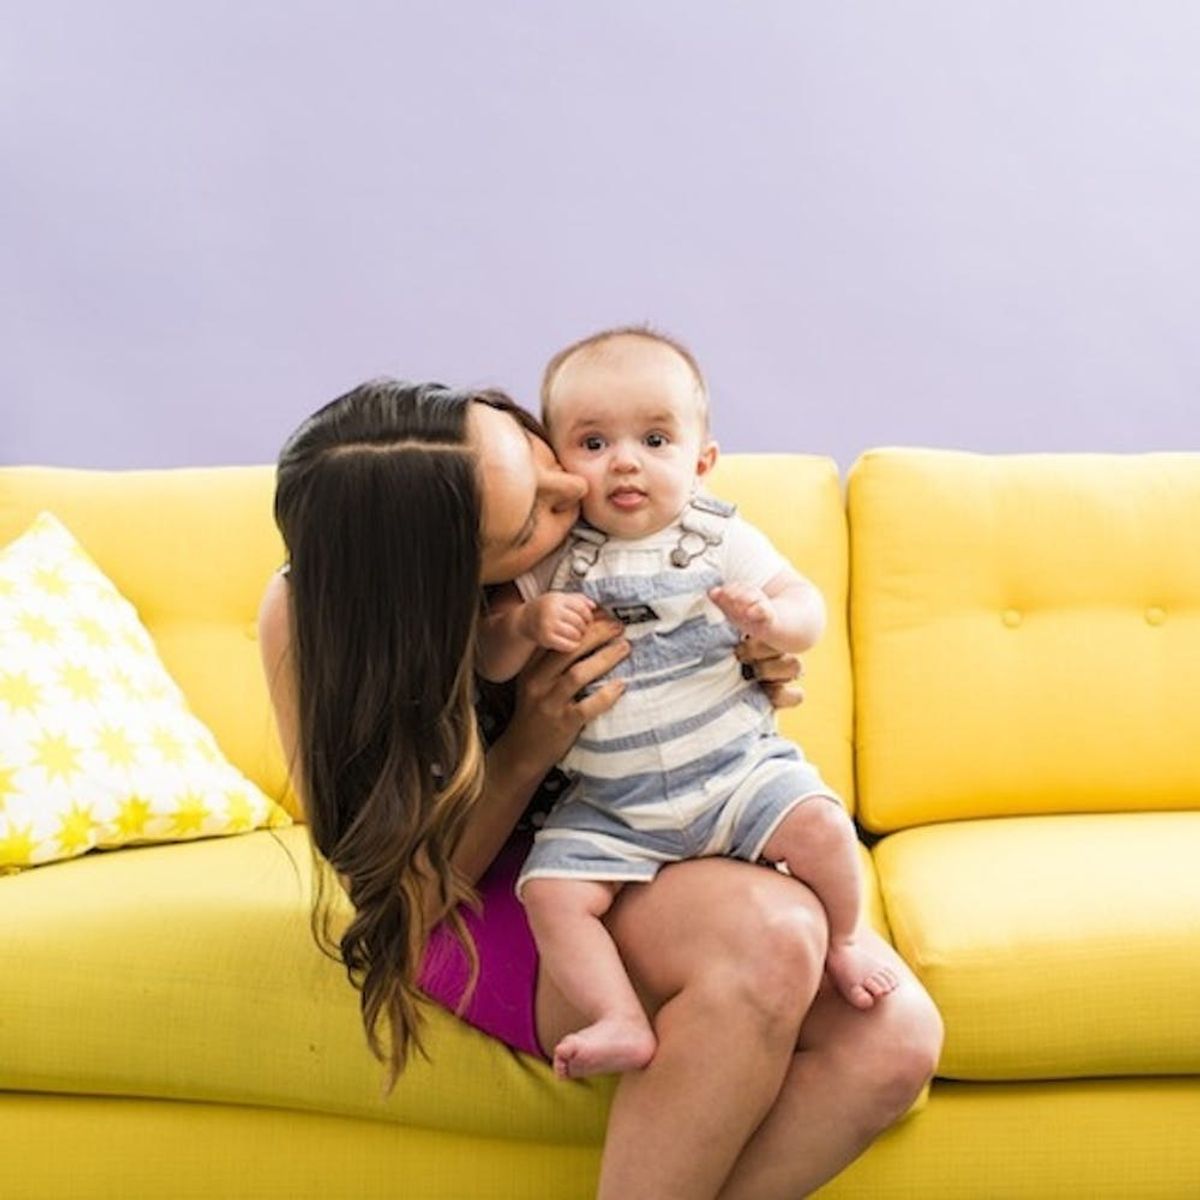 This Company Is Trying to Make Your Parental Leave More Seamless